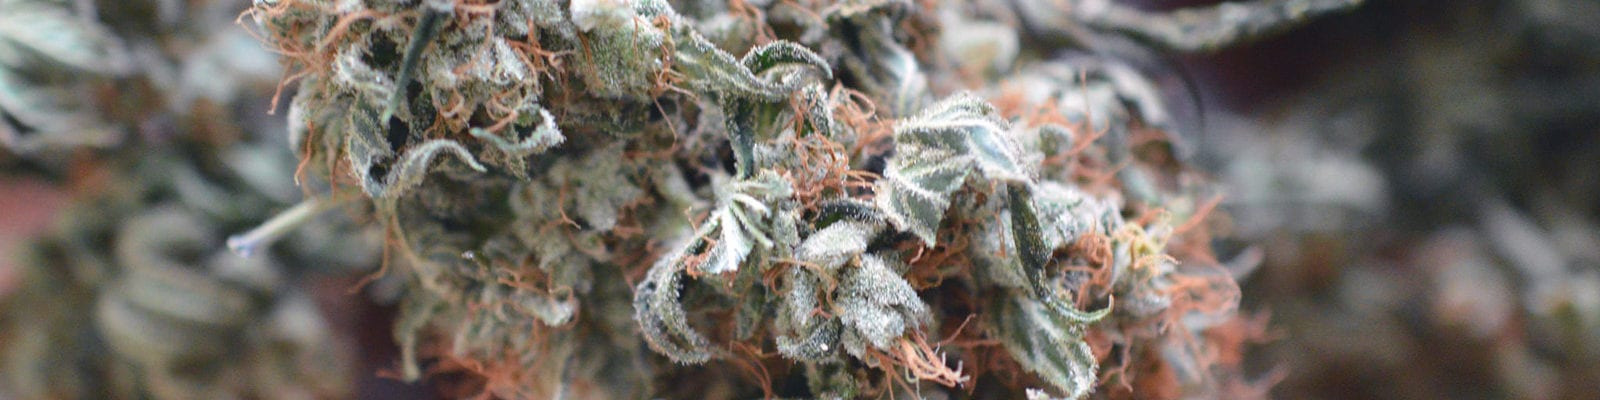 Micro photo of a trimmed, homegrown cannabis nug.